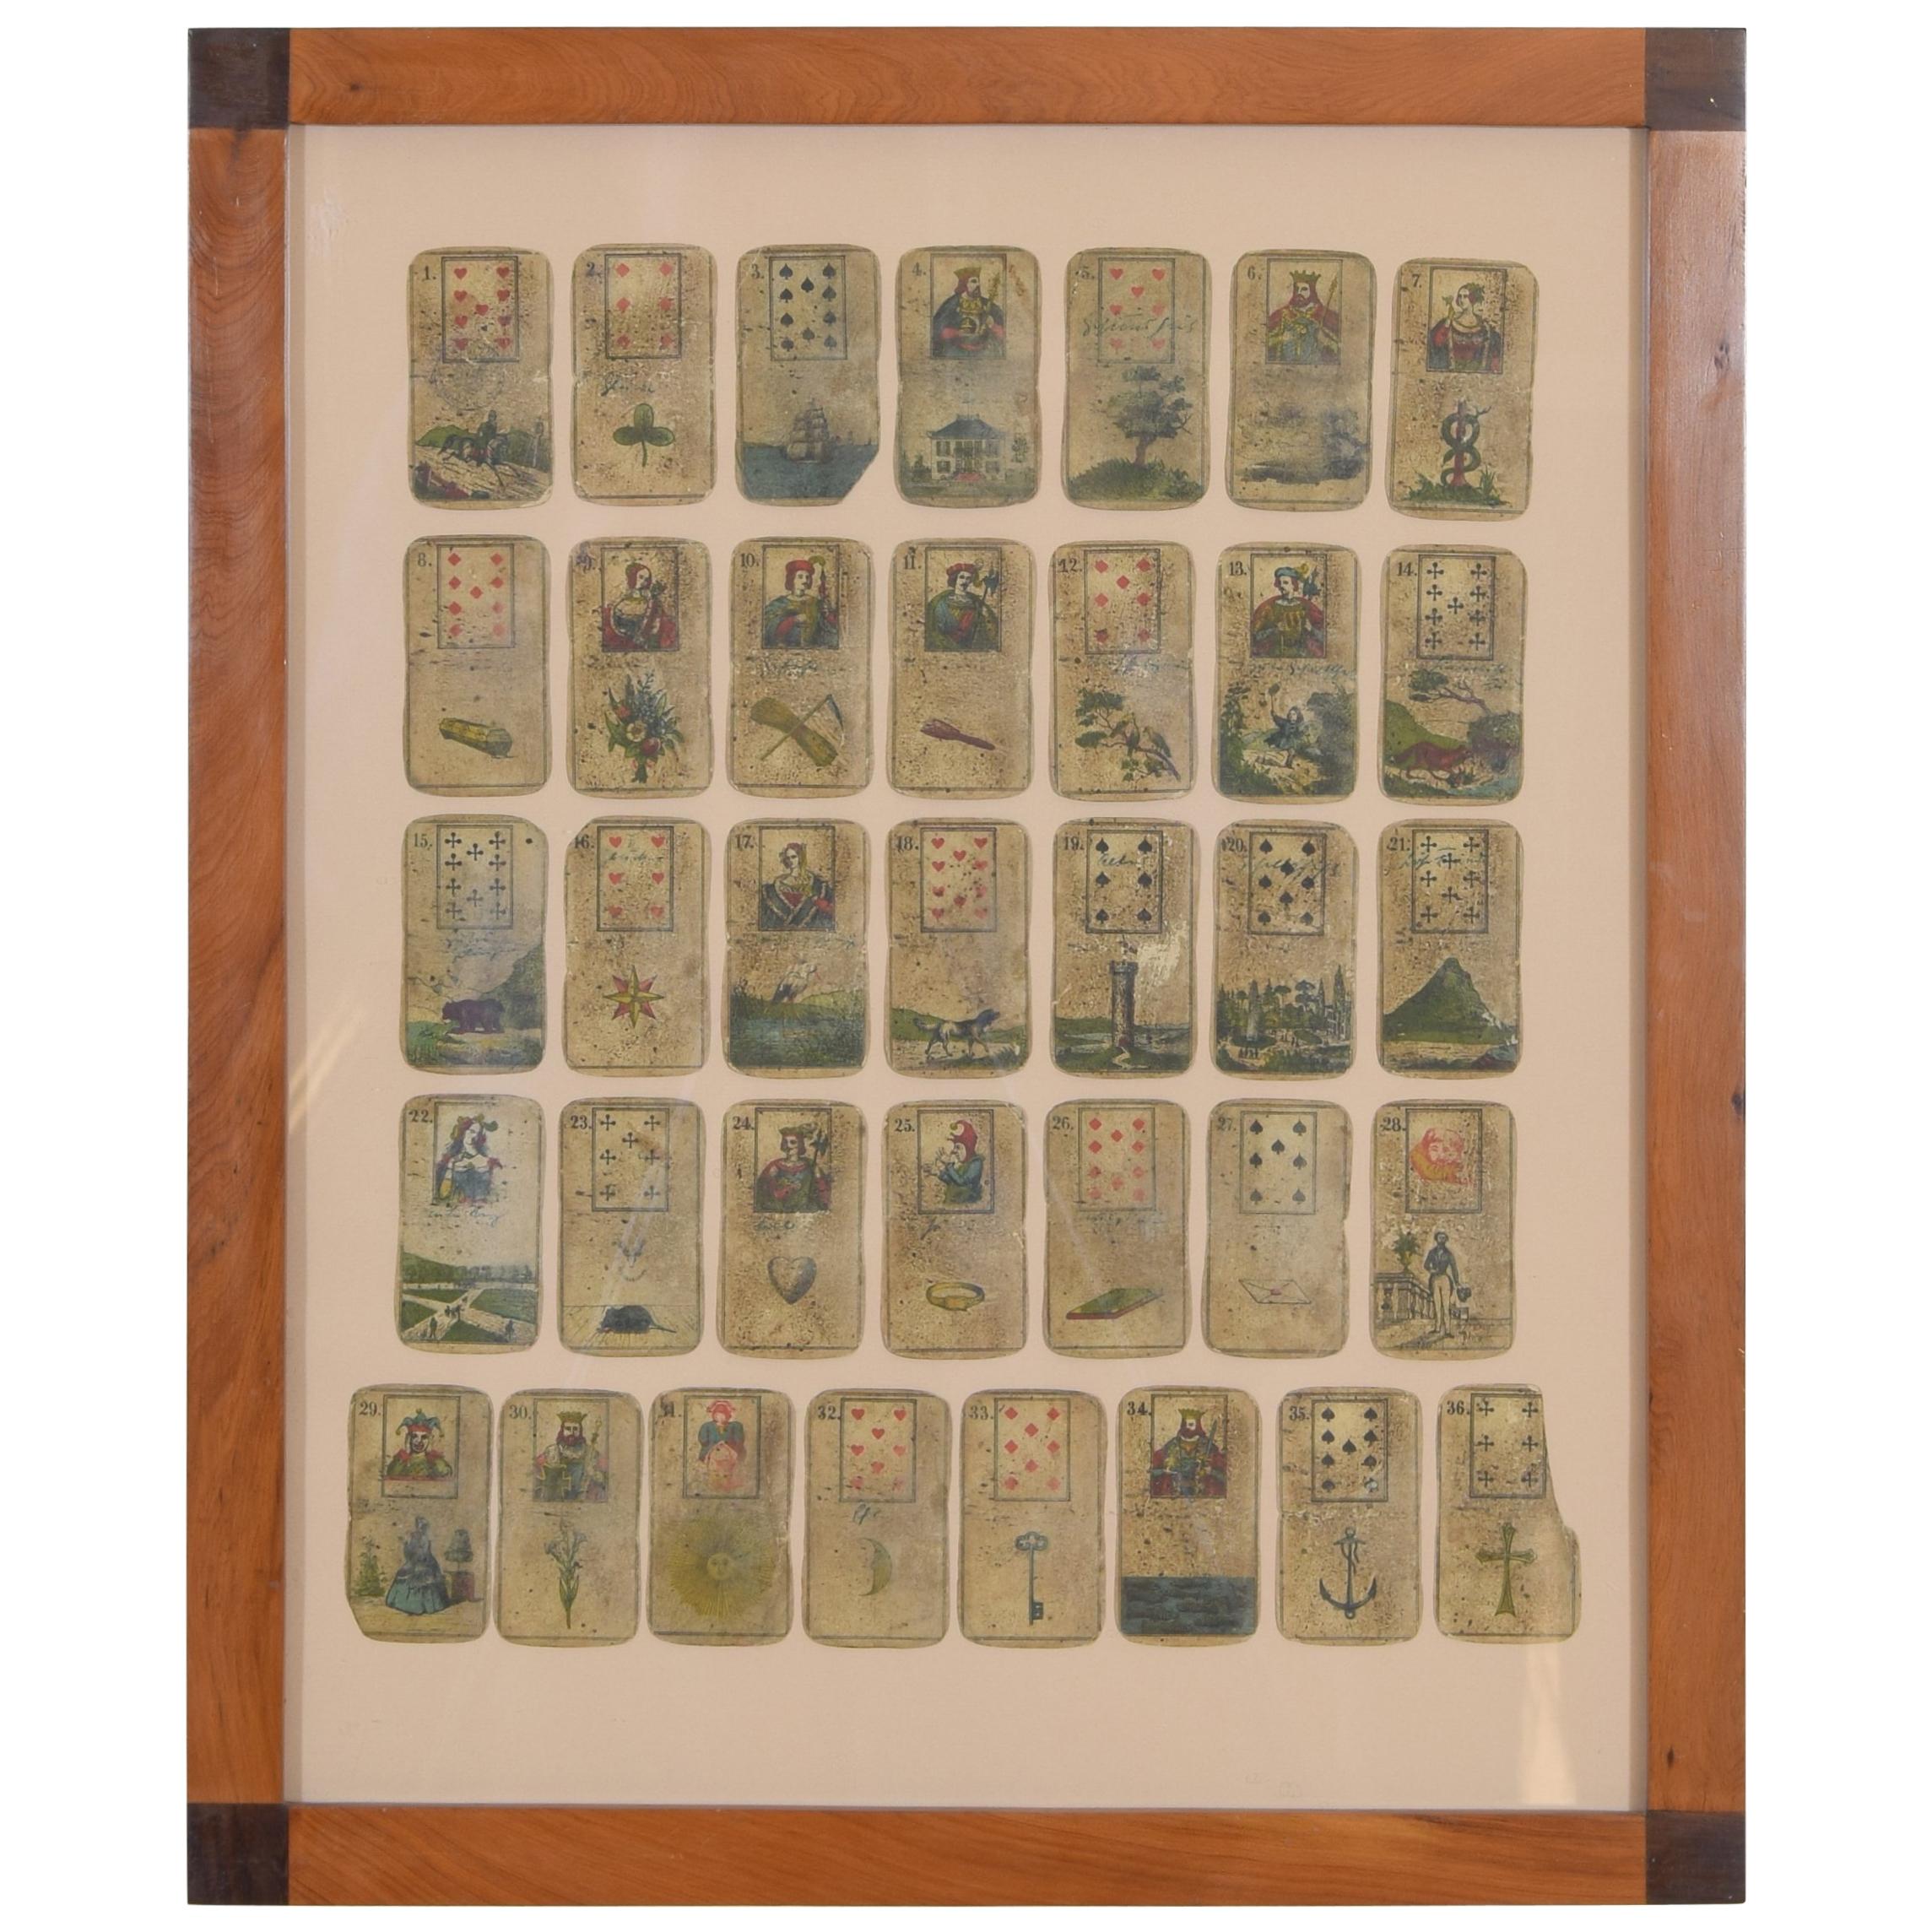 Framed Collection of Tarot or Playing Cards, Early 19th Century